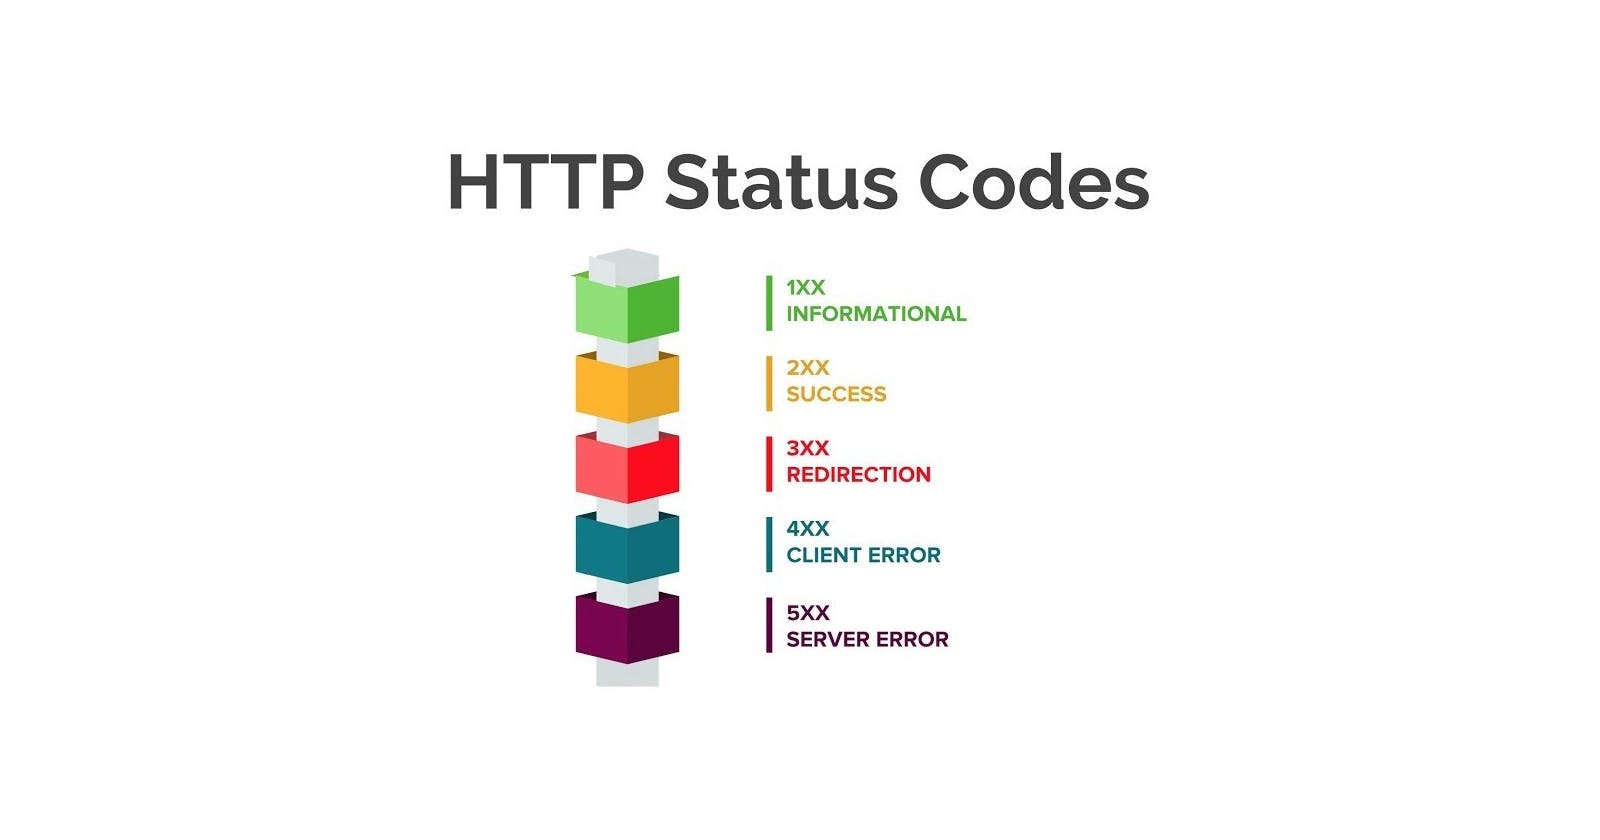 What HTTP Status Codes